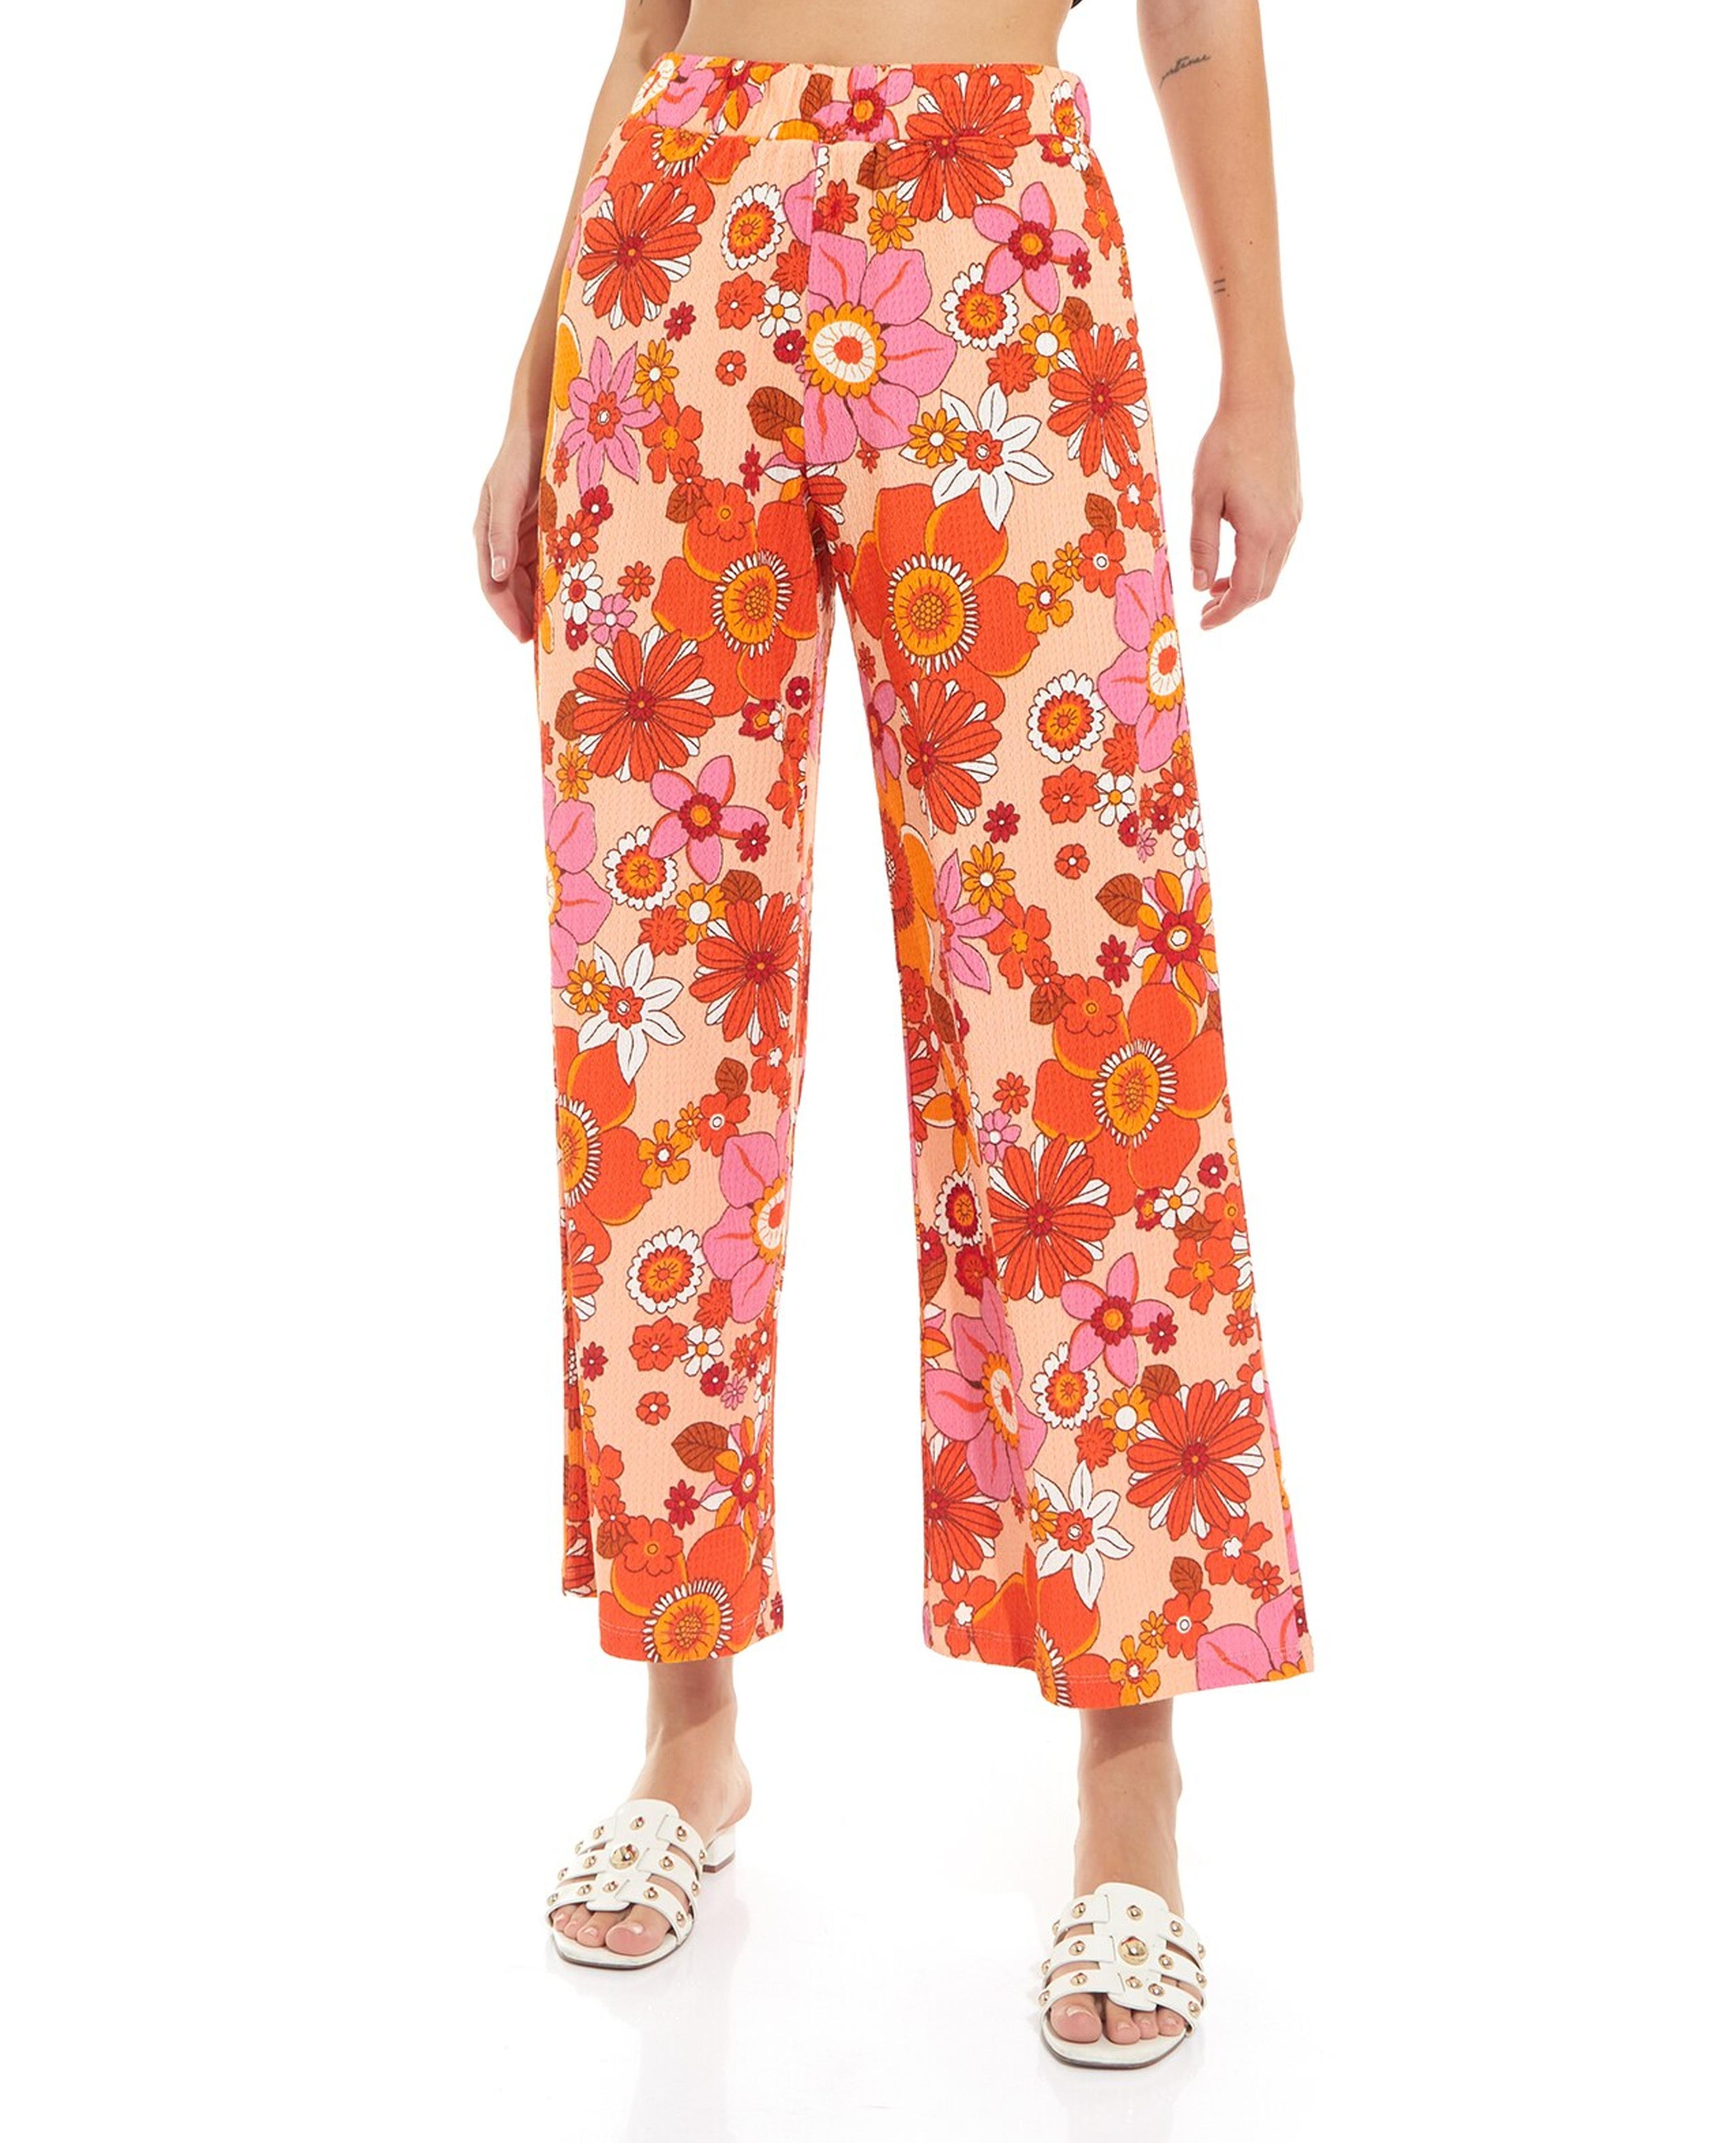 Floral Print Knit Pants with Elastic Waist